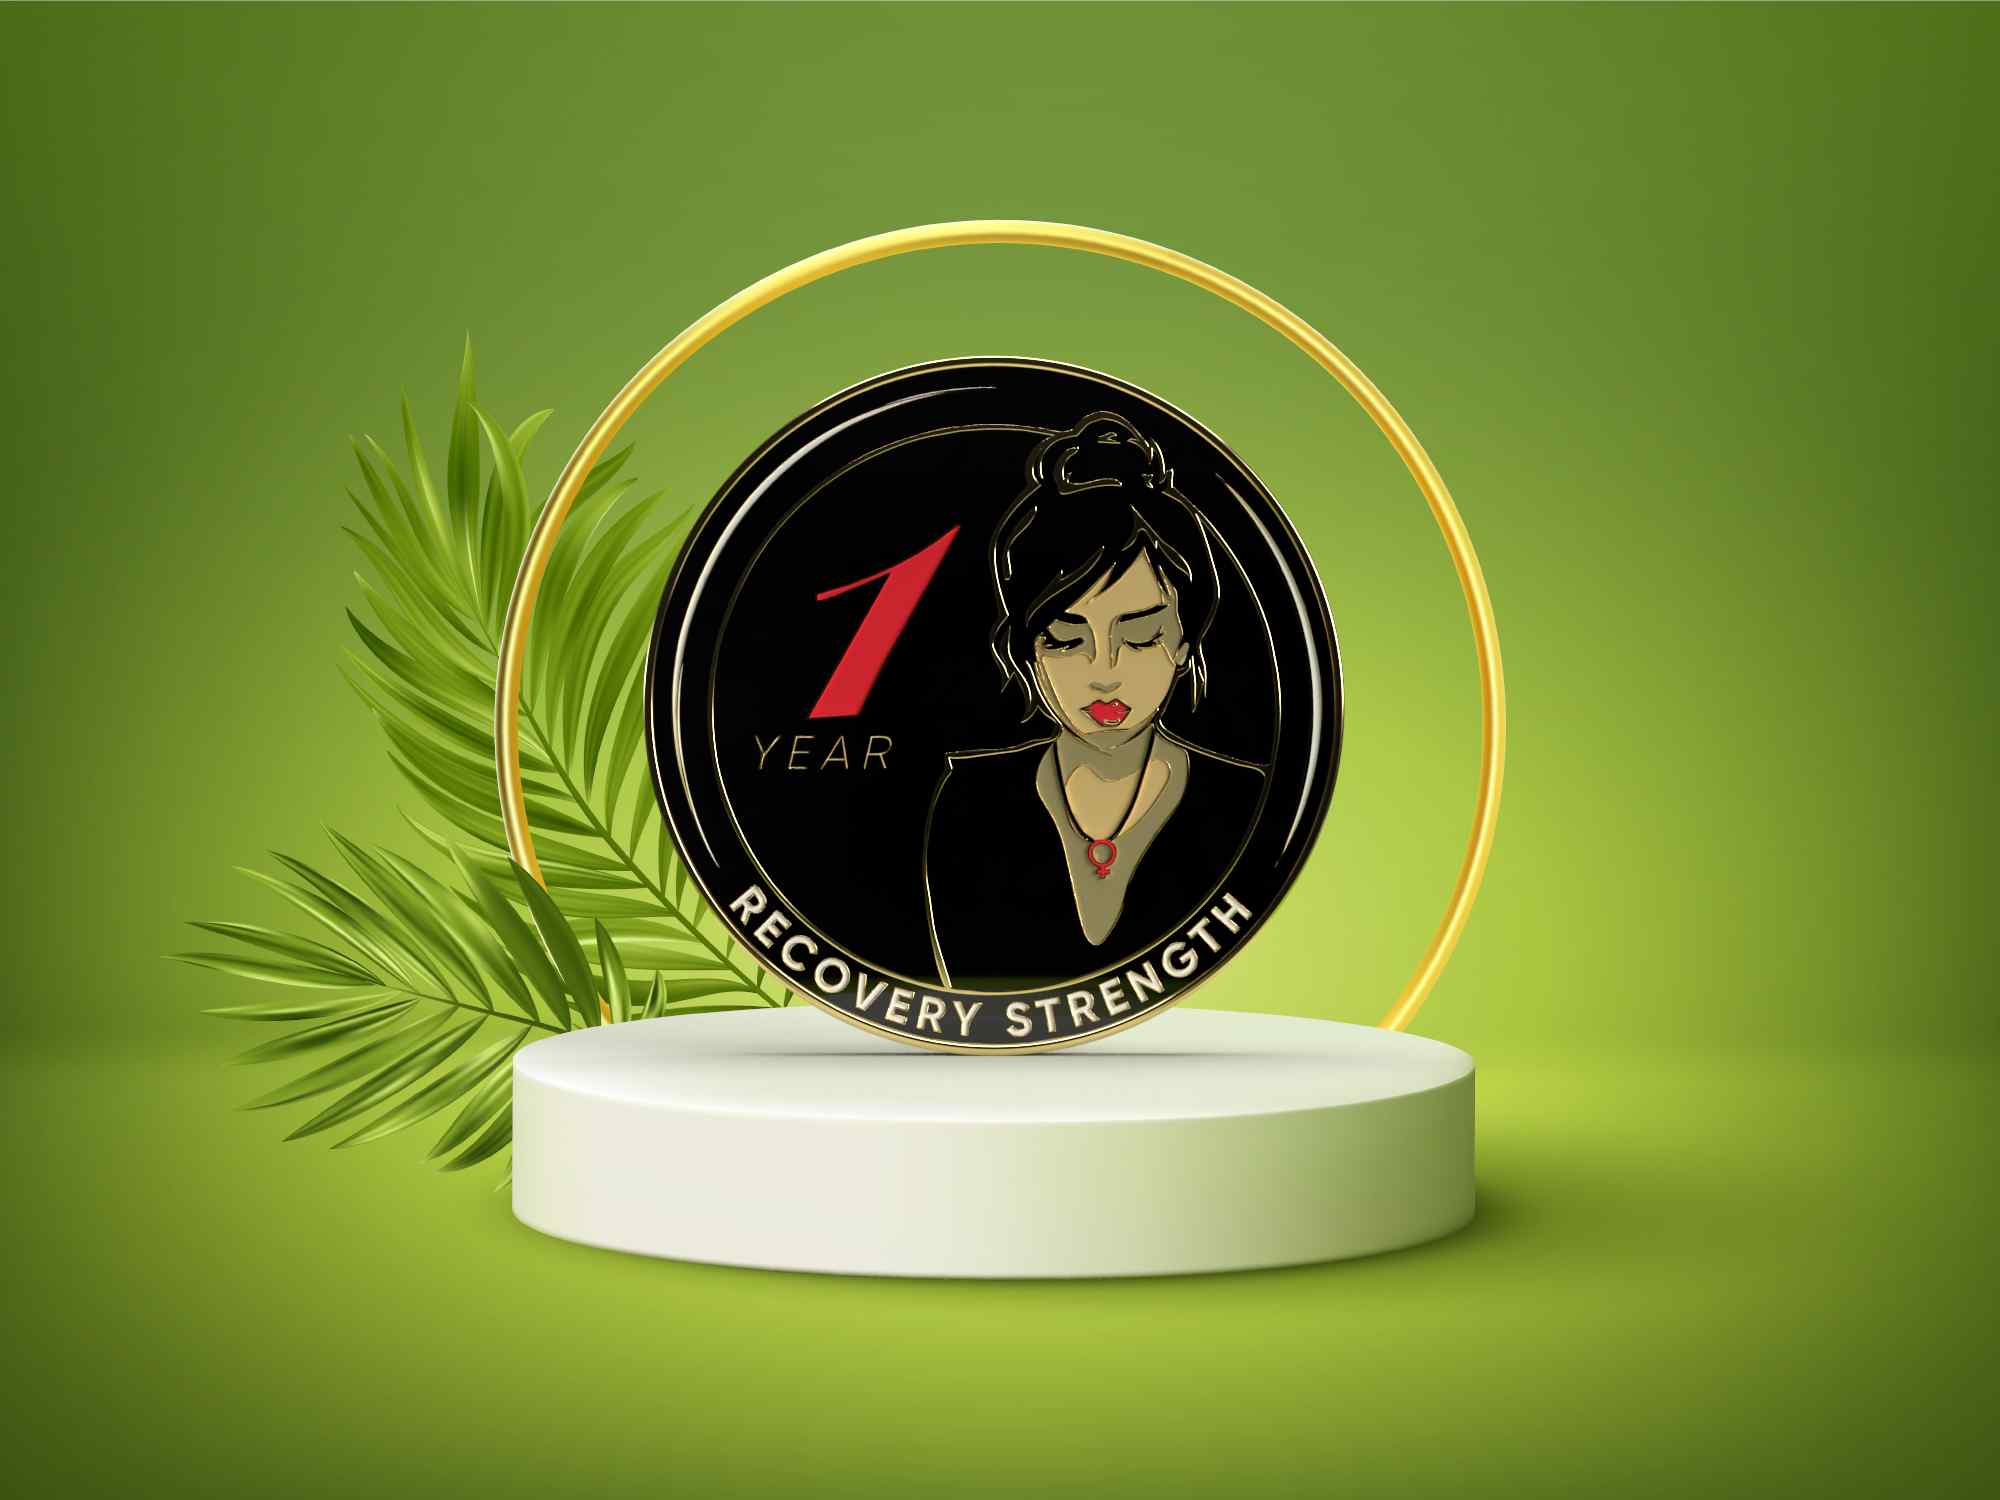 Women of Serenity AA Medallion Comes in Red Gift Box 1-50 Years